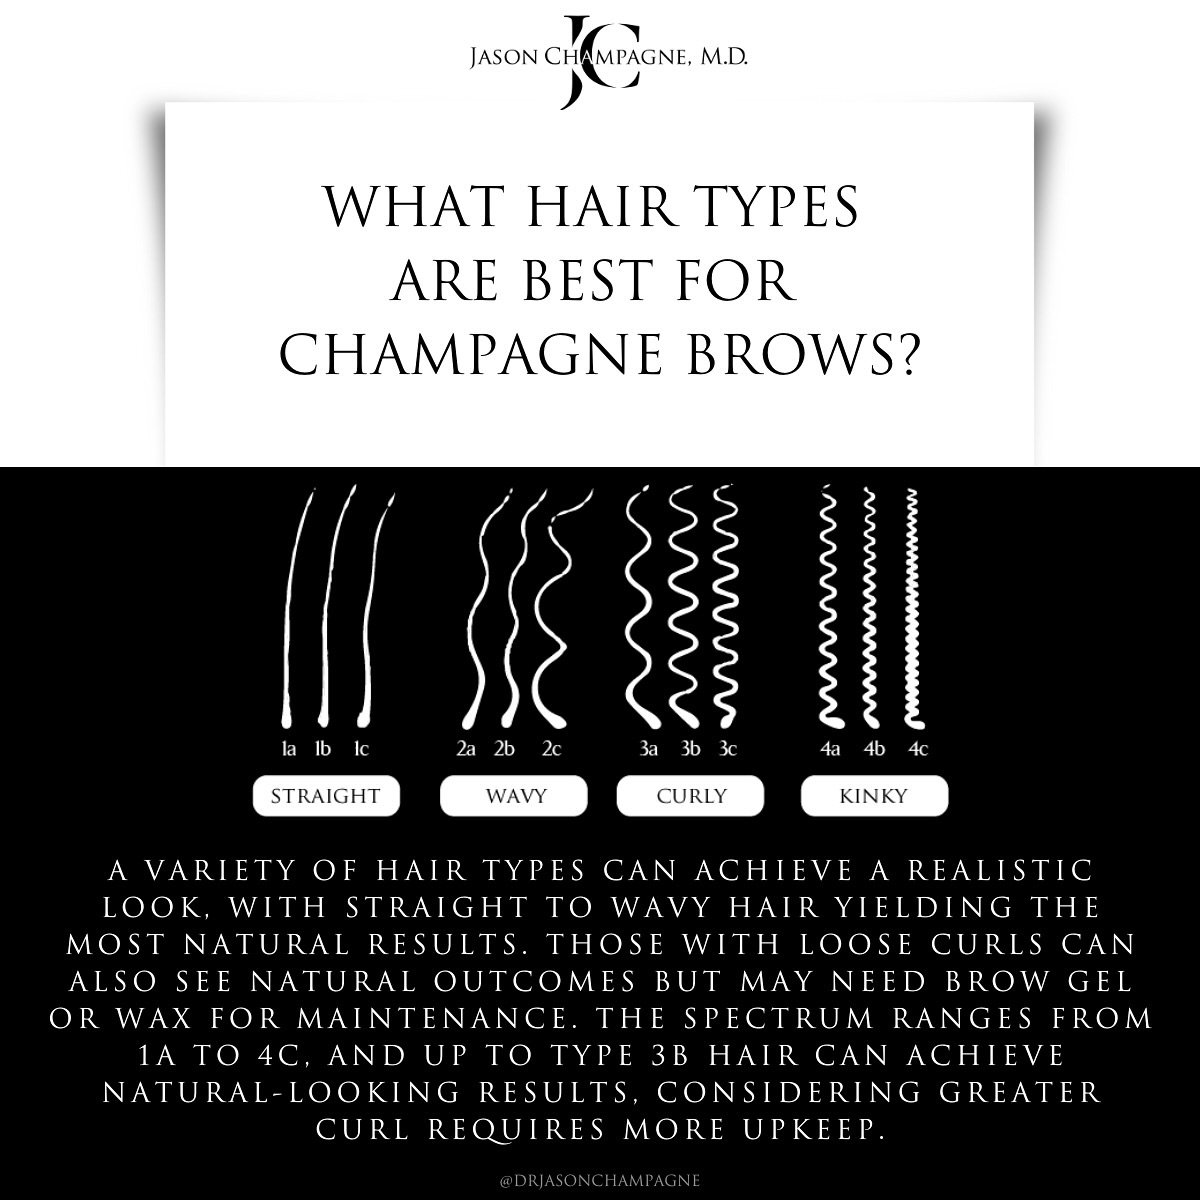 Individuals with curly or textured hair types must have a consultation to determine their candidacy for #ChampagneBrows. This ensures that the technique can be tailored to their specific hair type for optimal results. To read more, follow the link in